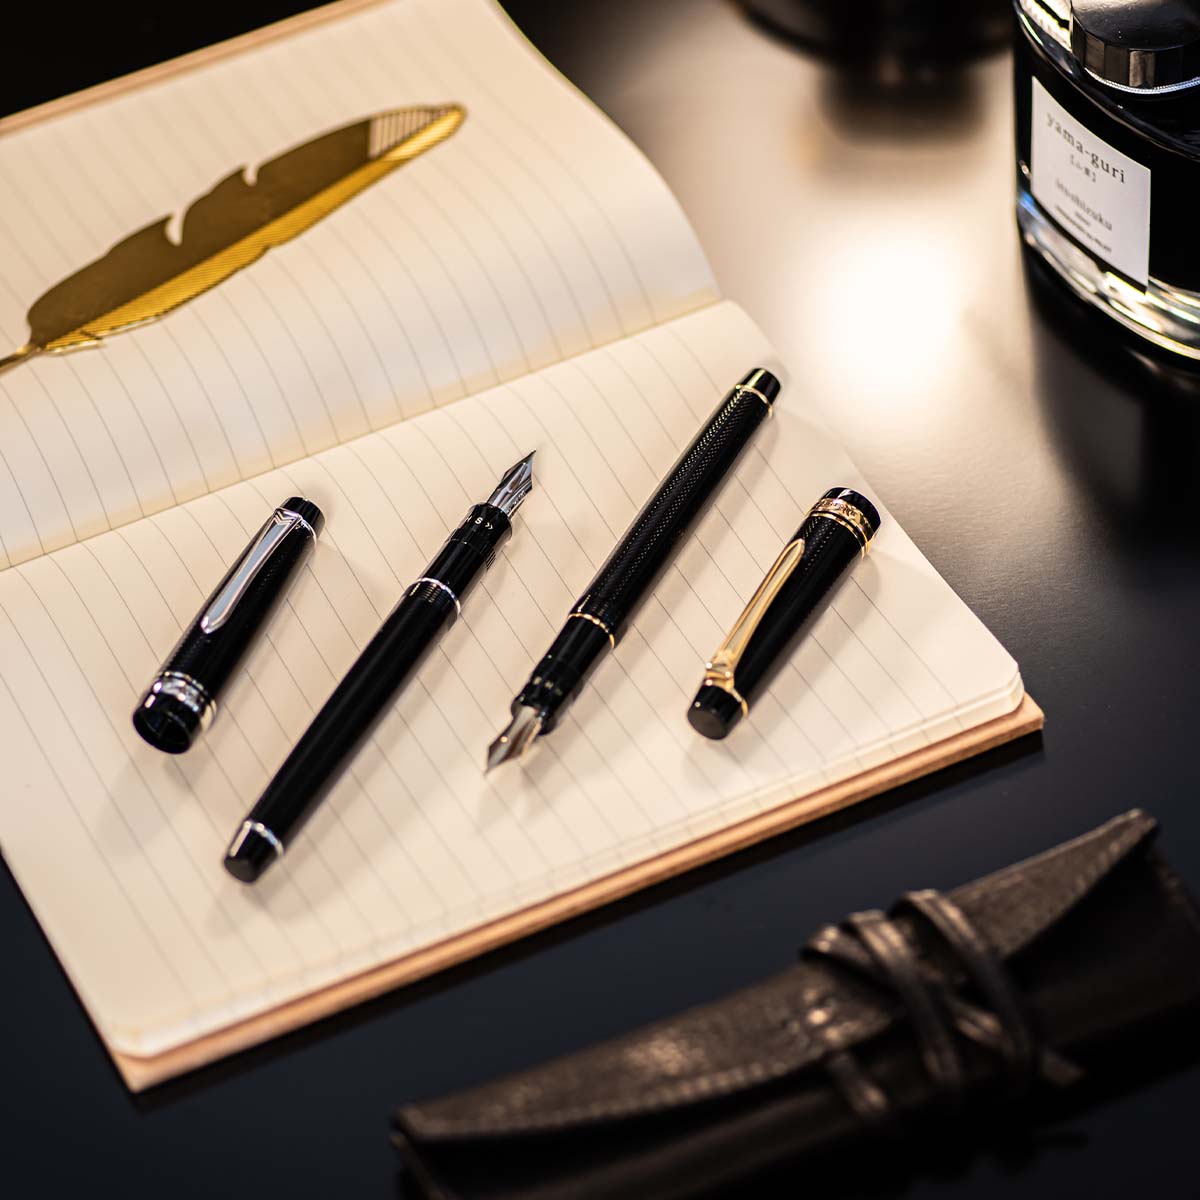 Justus 95 Gold Fine in the group Pens / Fine Writing / Fountain Pens at Pen Store (109453)